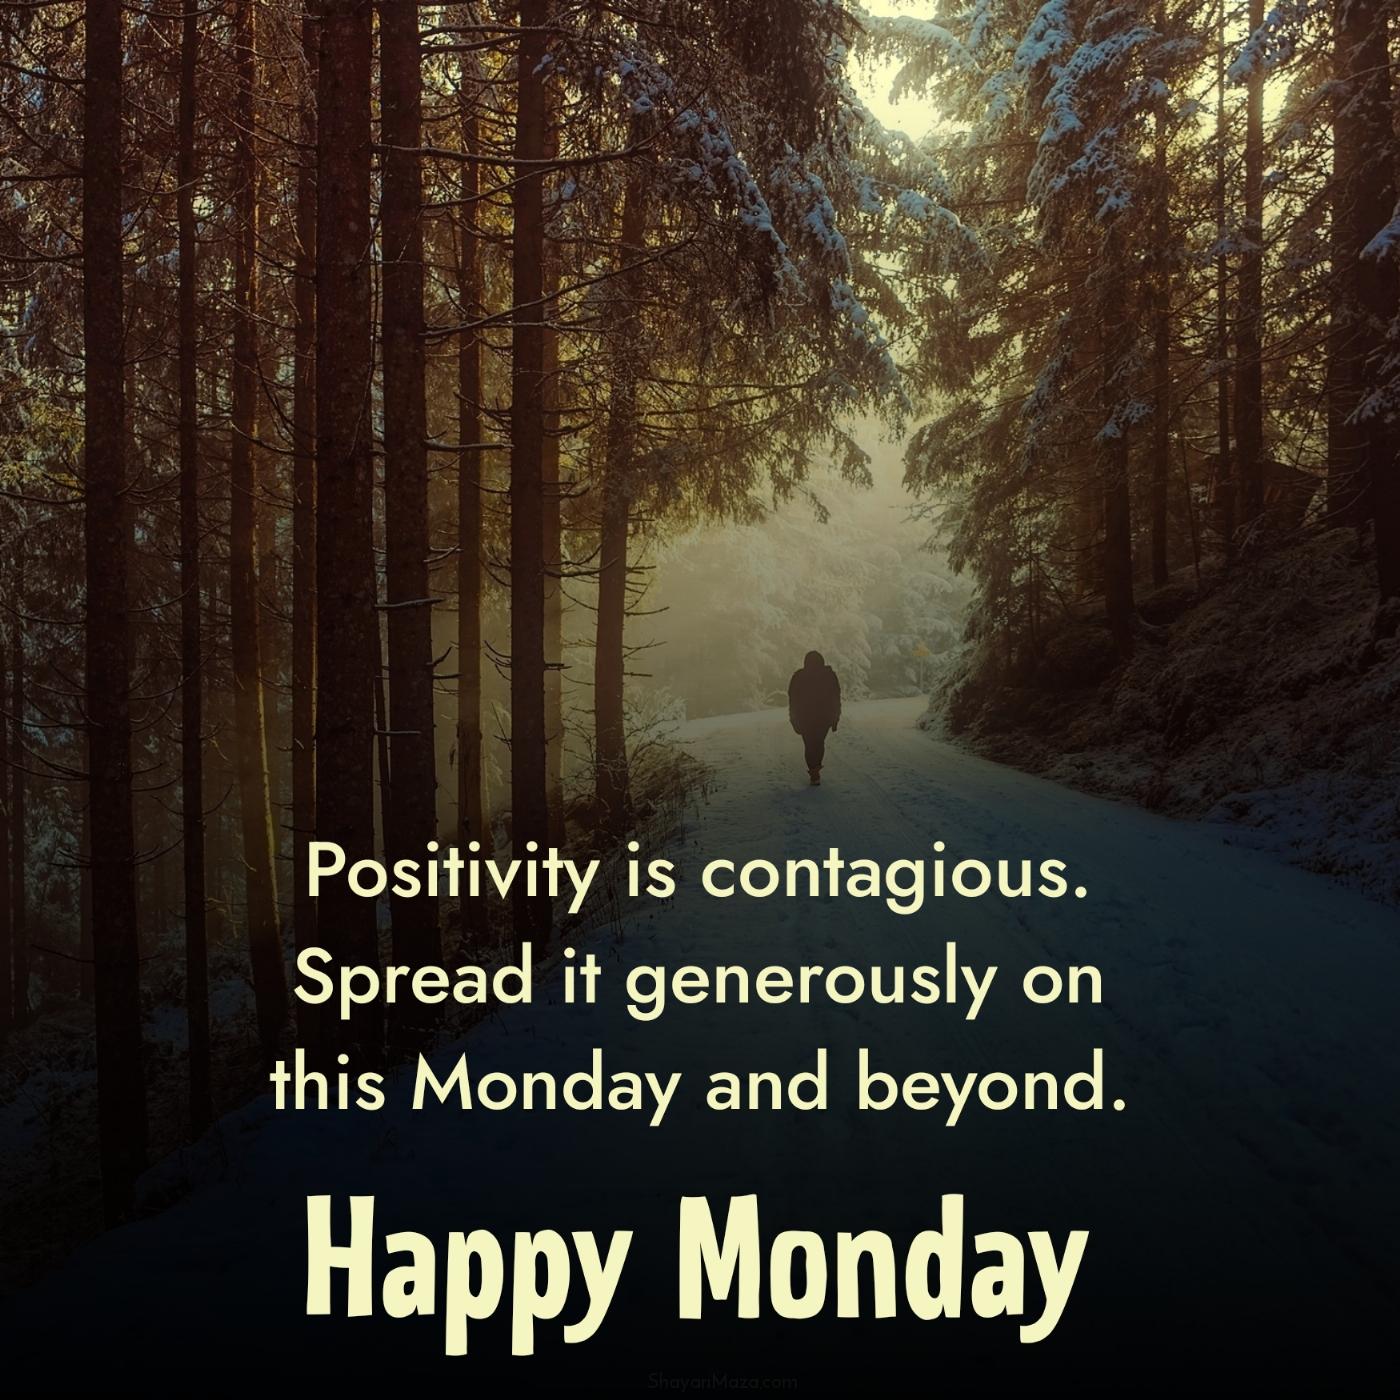 Positivity is contagious Spread it generously on this Monday